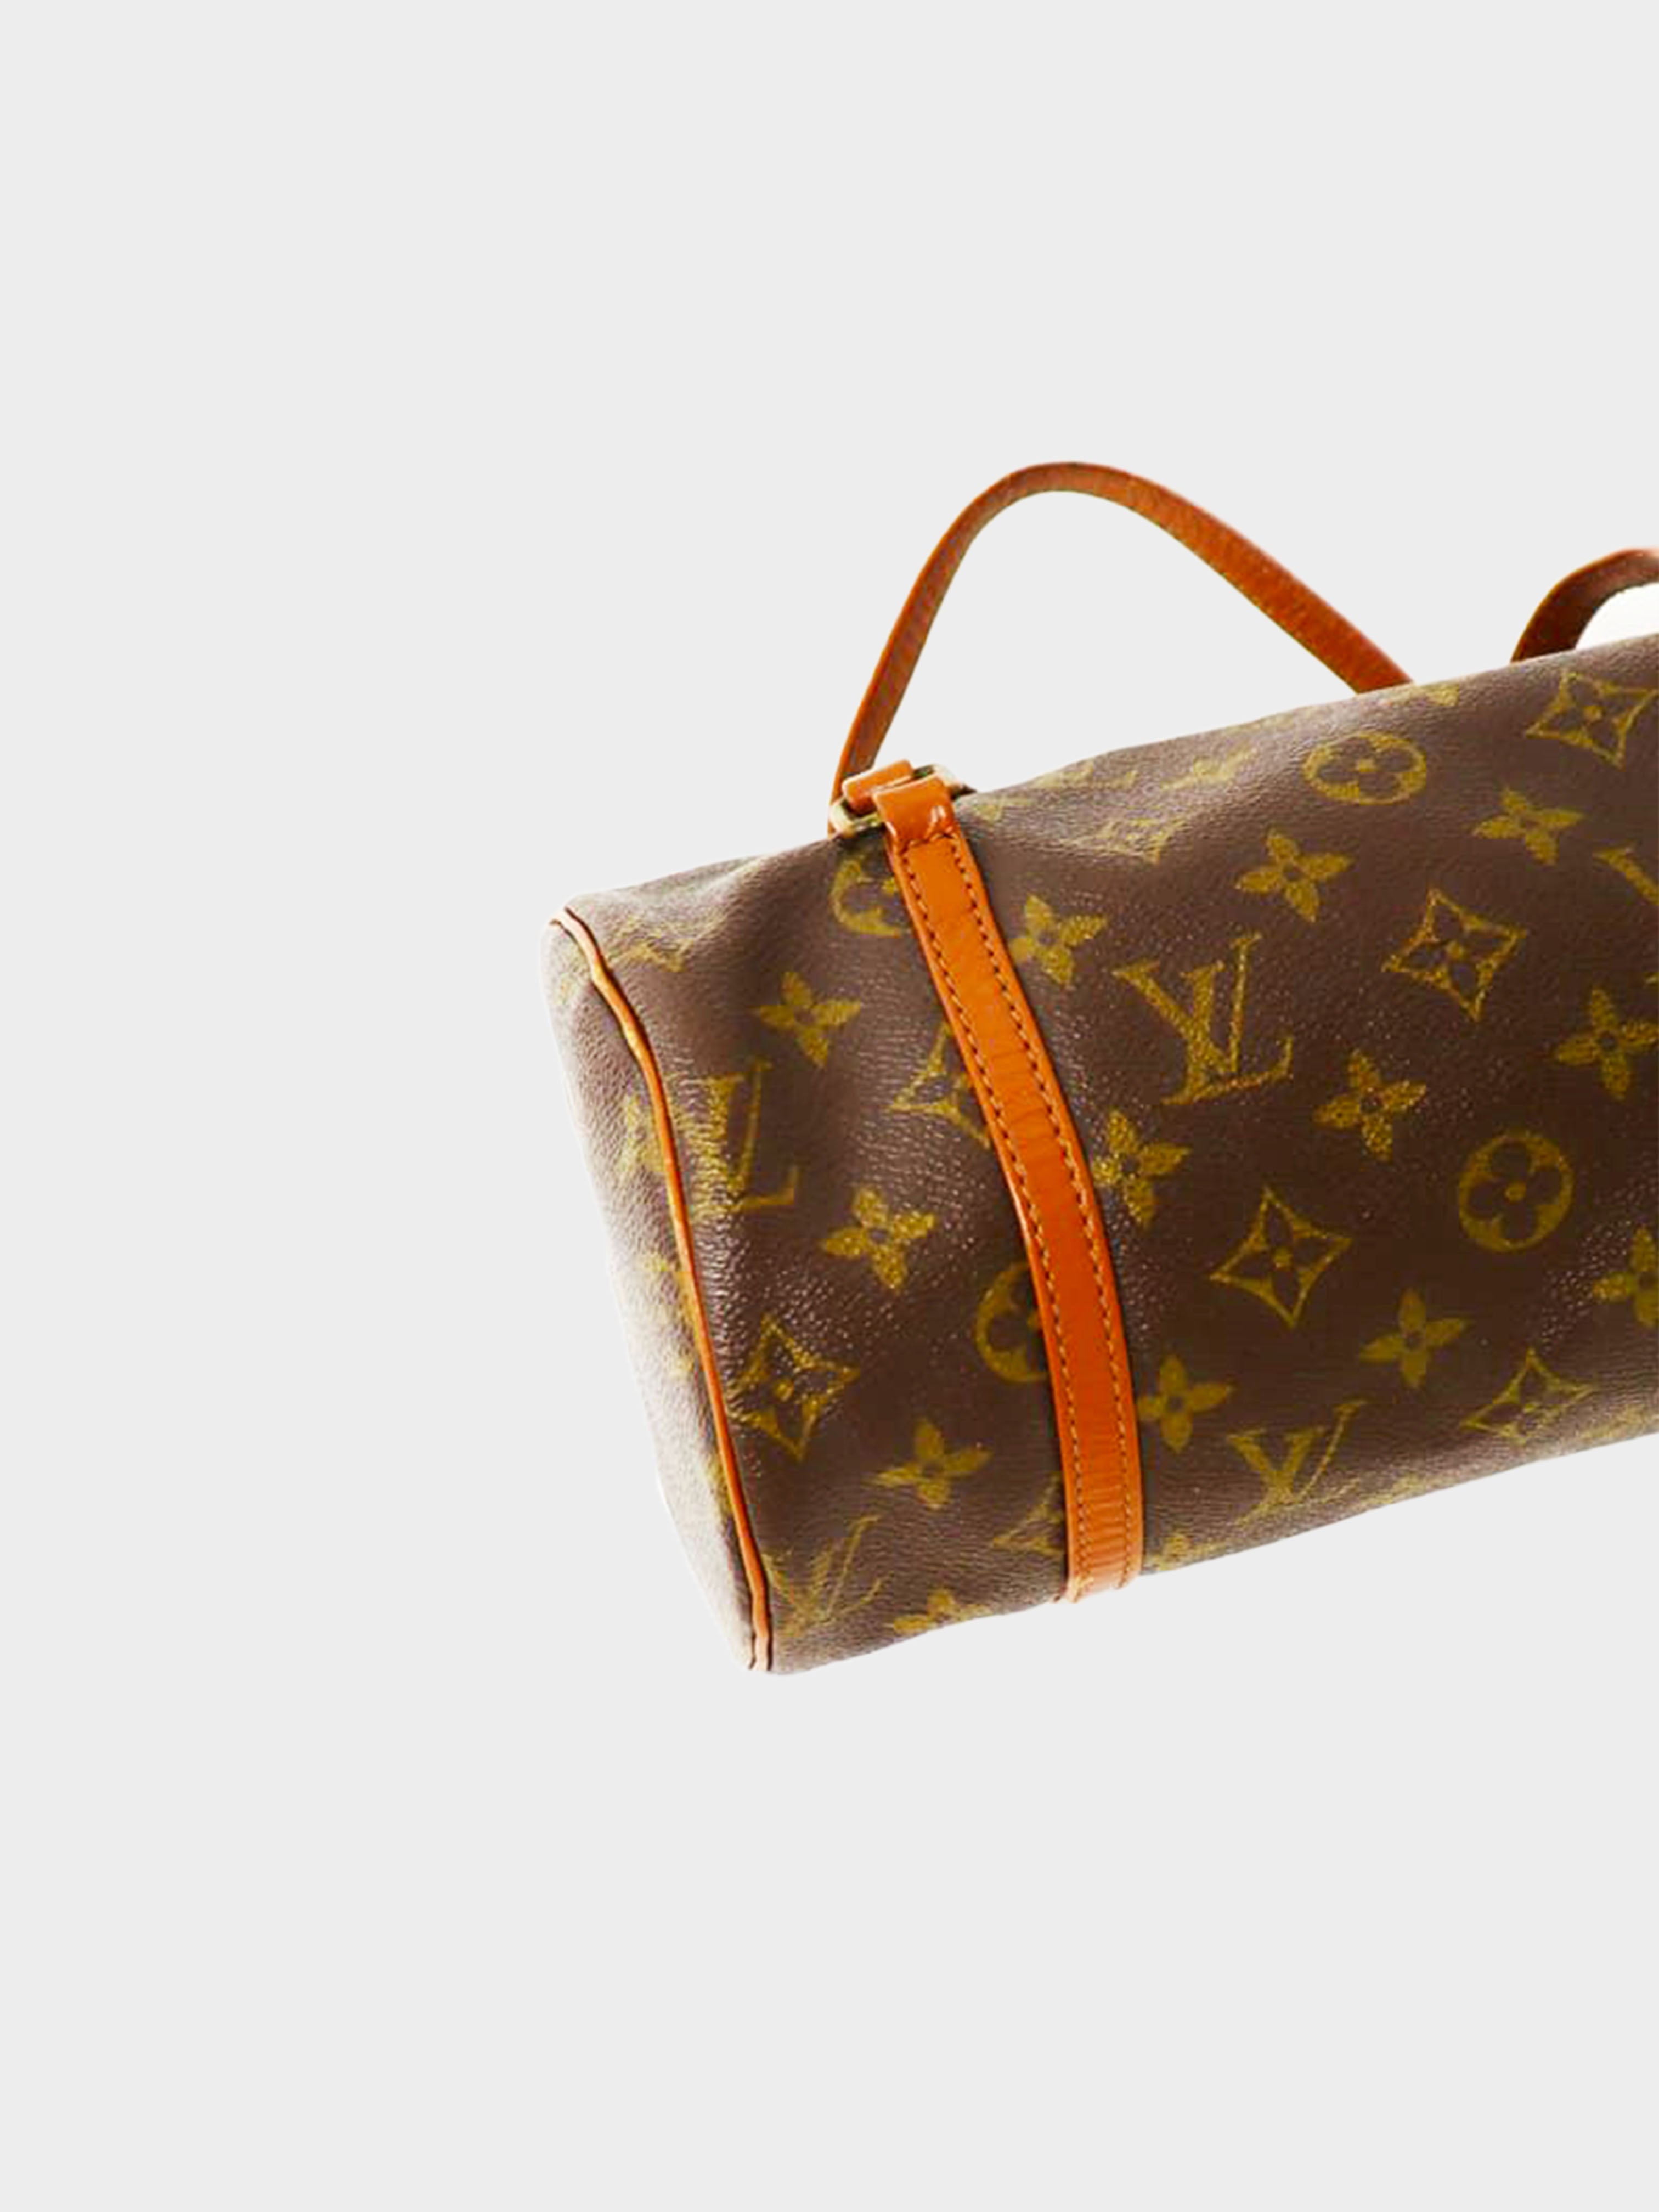 Authentic Louis Vuitton Cylinder Bag  Kissys Kloset  Online Store  Powered by Storenvy